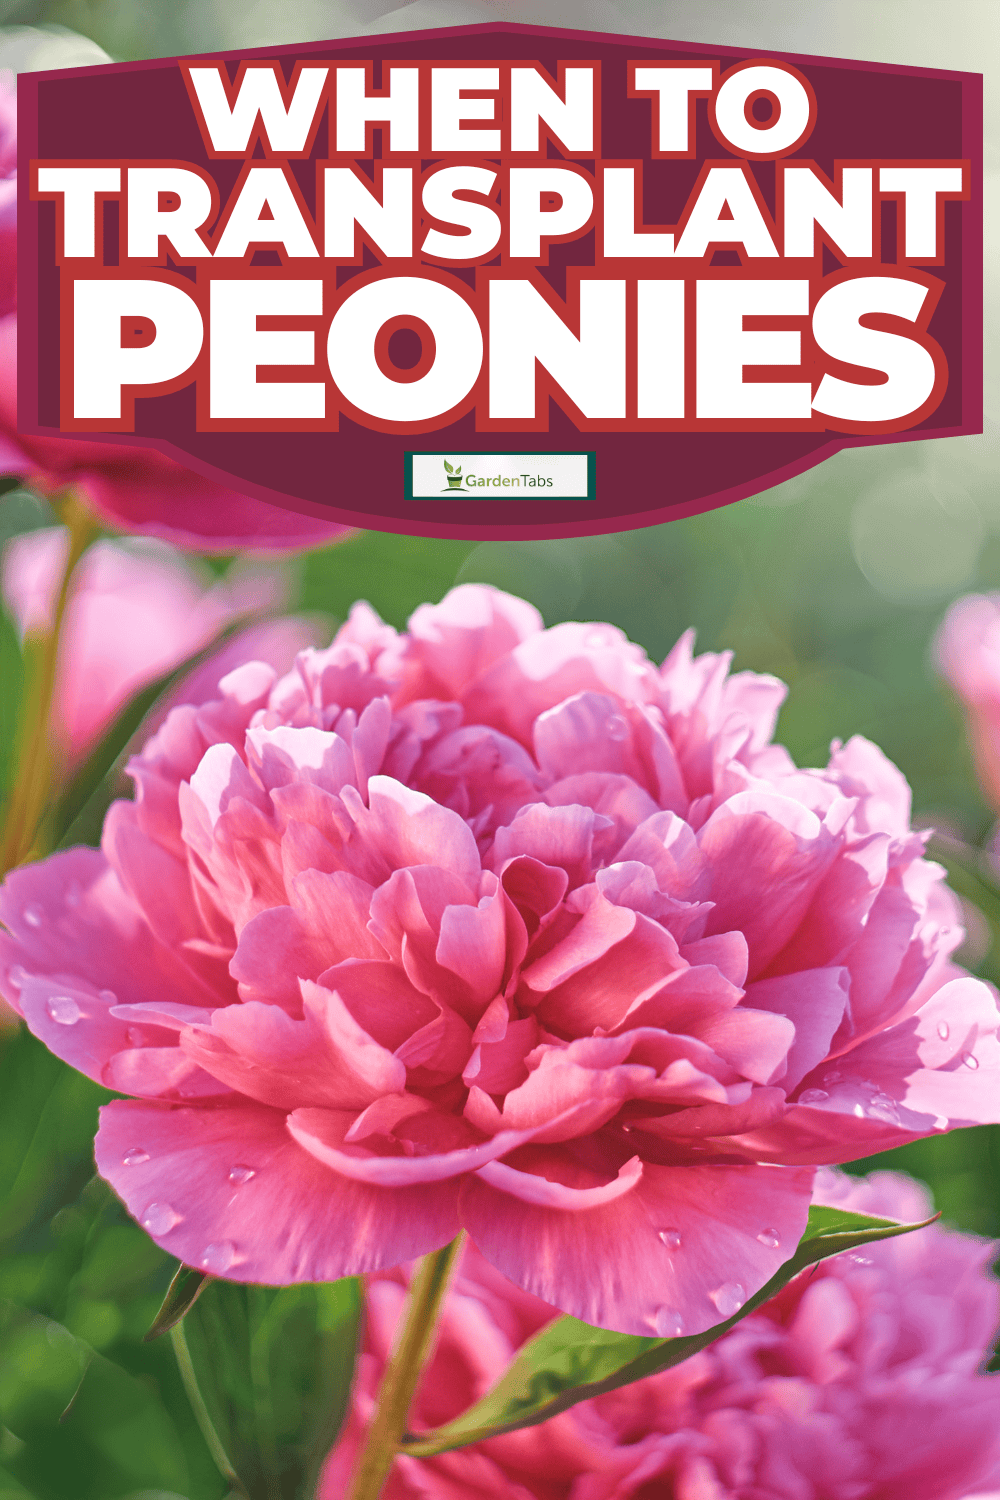 When to Transplant Peonies